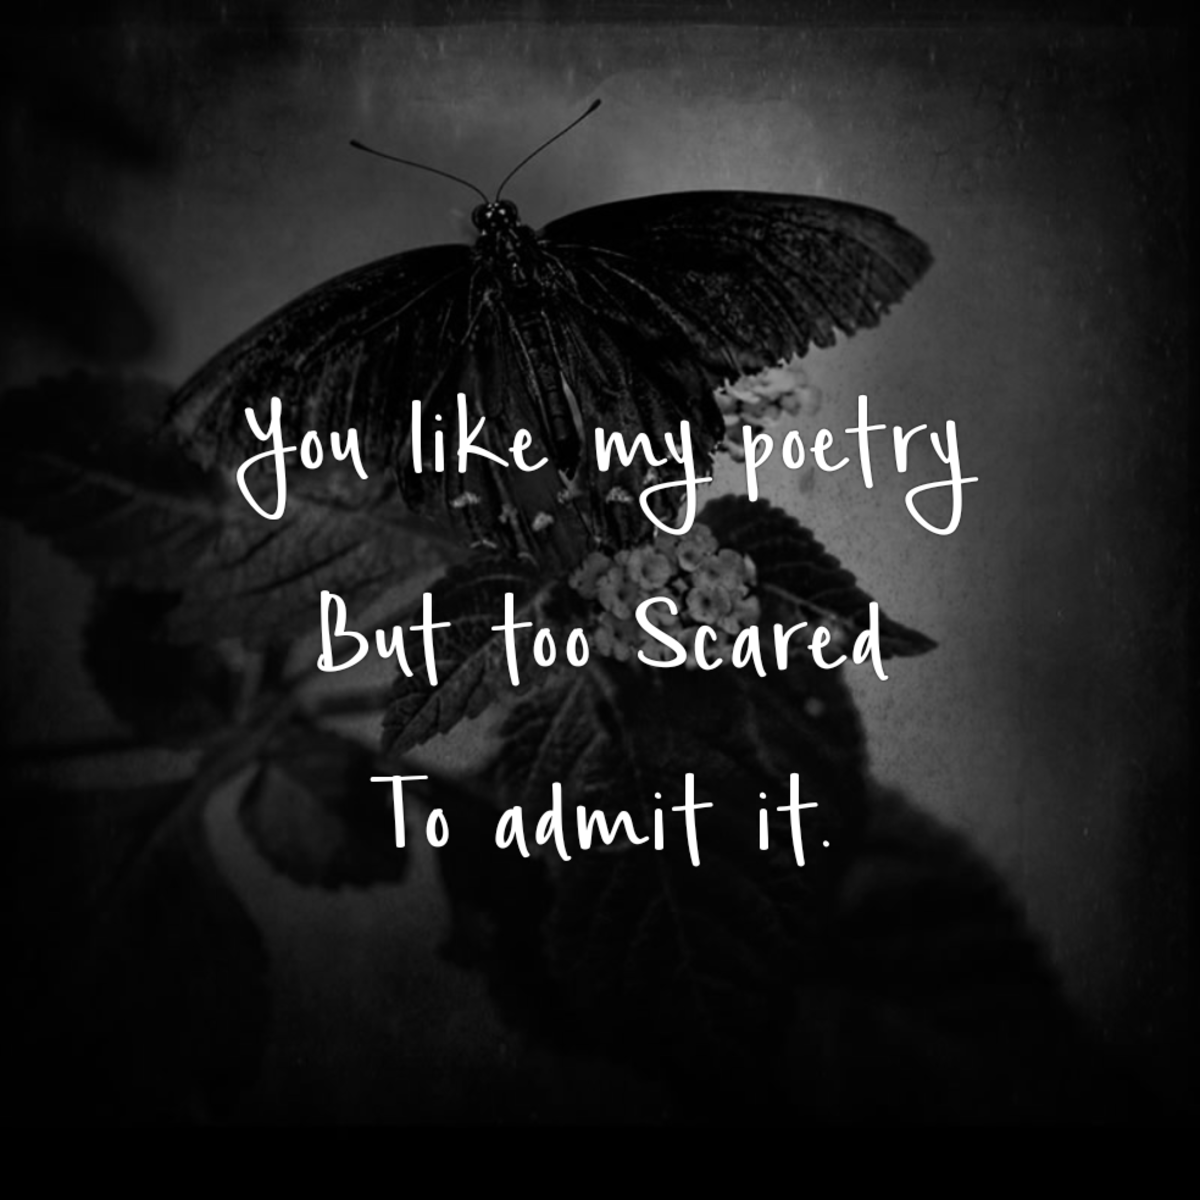 You Like My Poetry but Too Scared to Admit It.